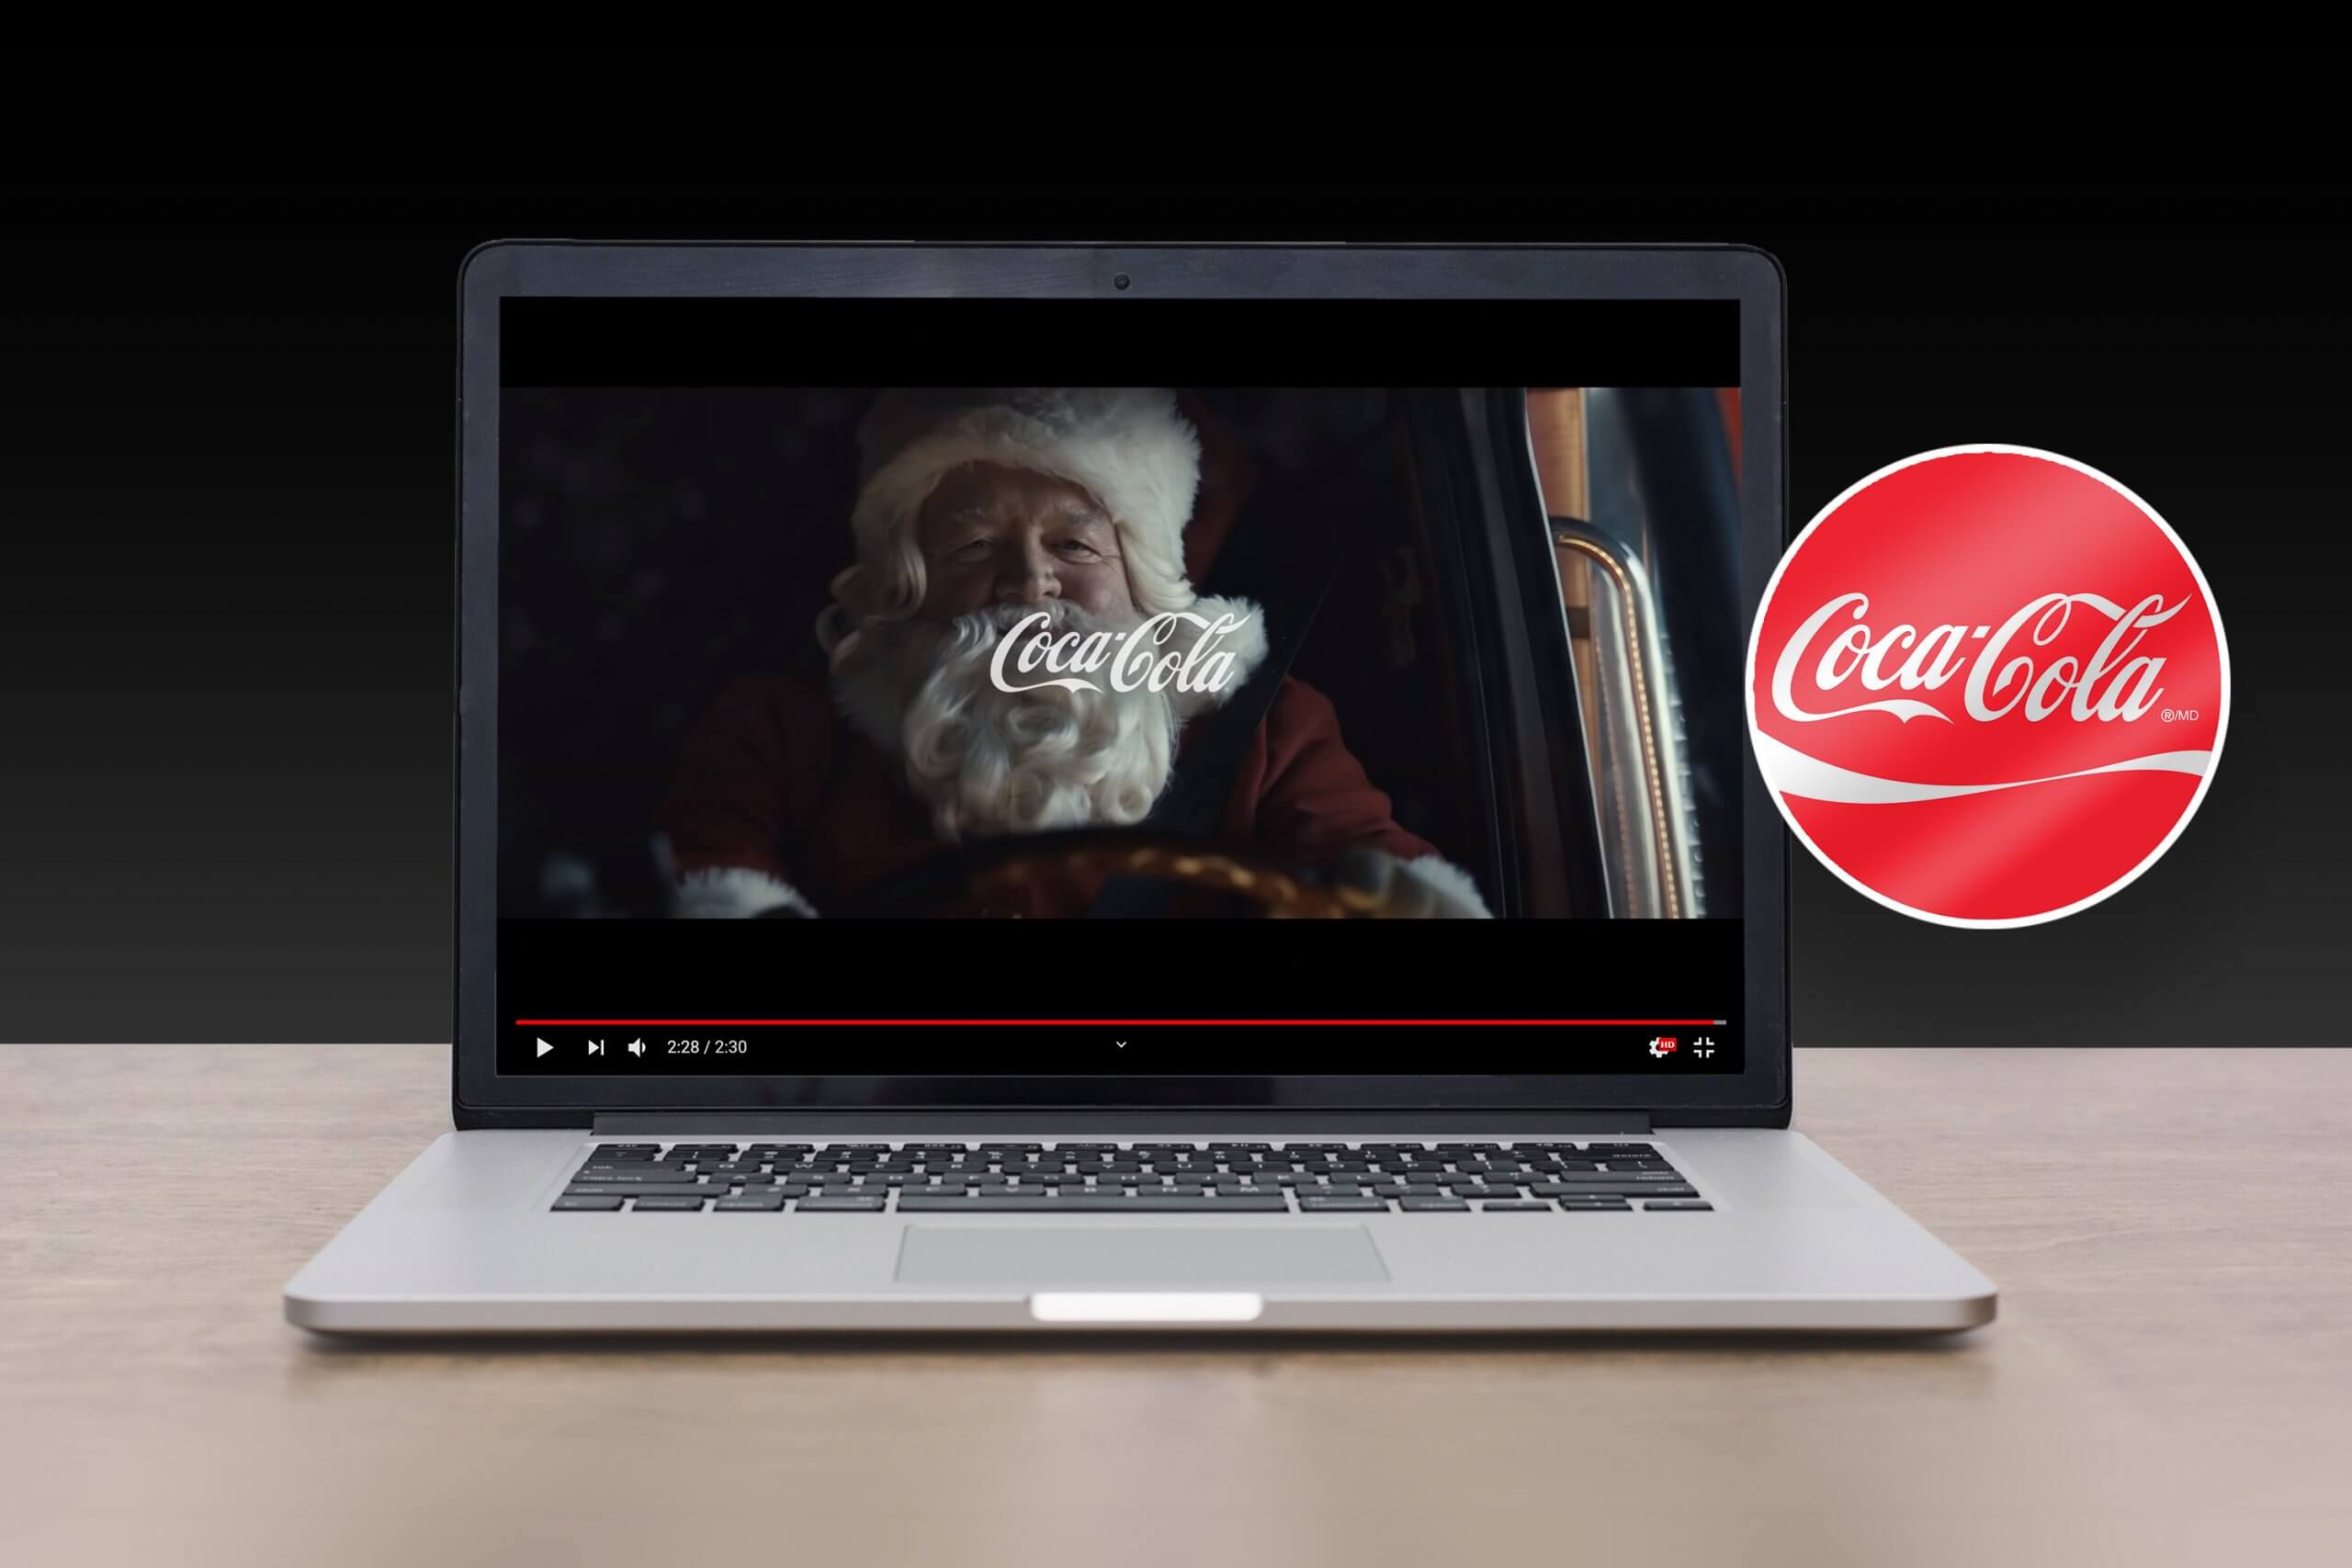 Coca Cola's Emotional Ad Warms the Hearts of Many this Christmas